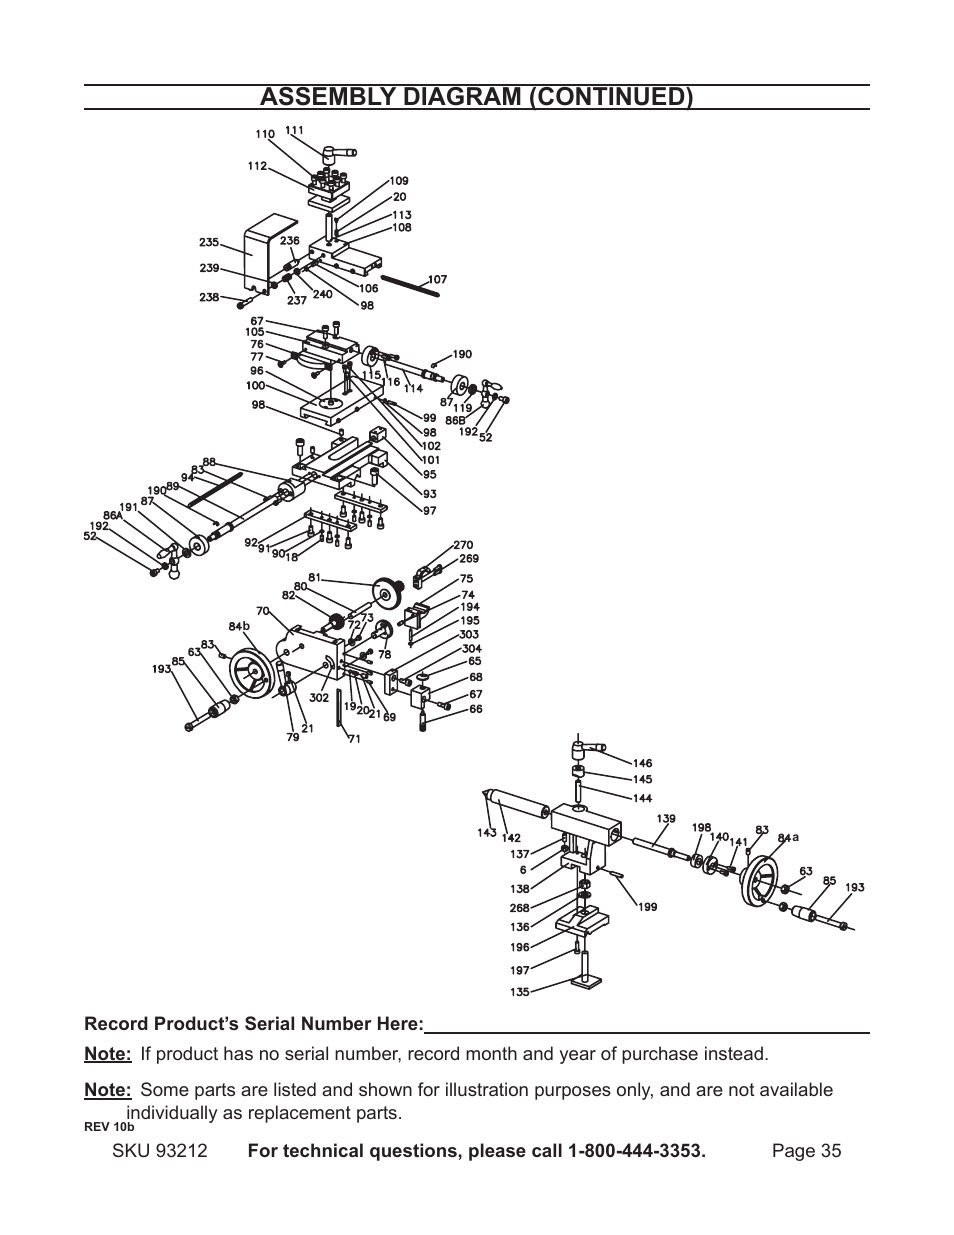 Assembly diagram (continued) | Harbor Freight Tools 93212 User Manual